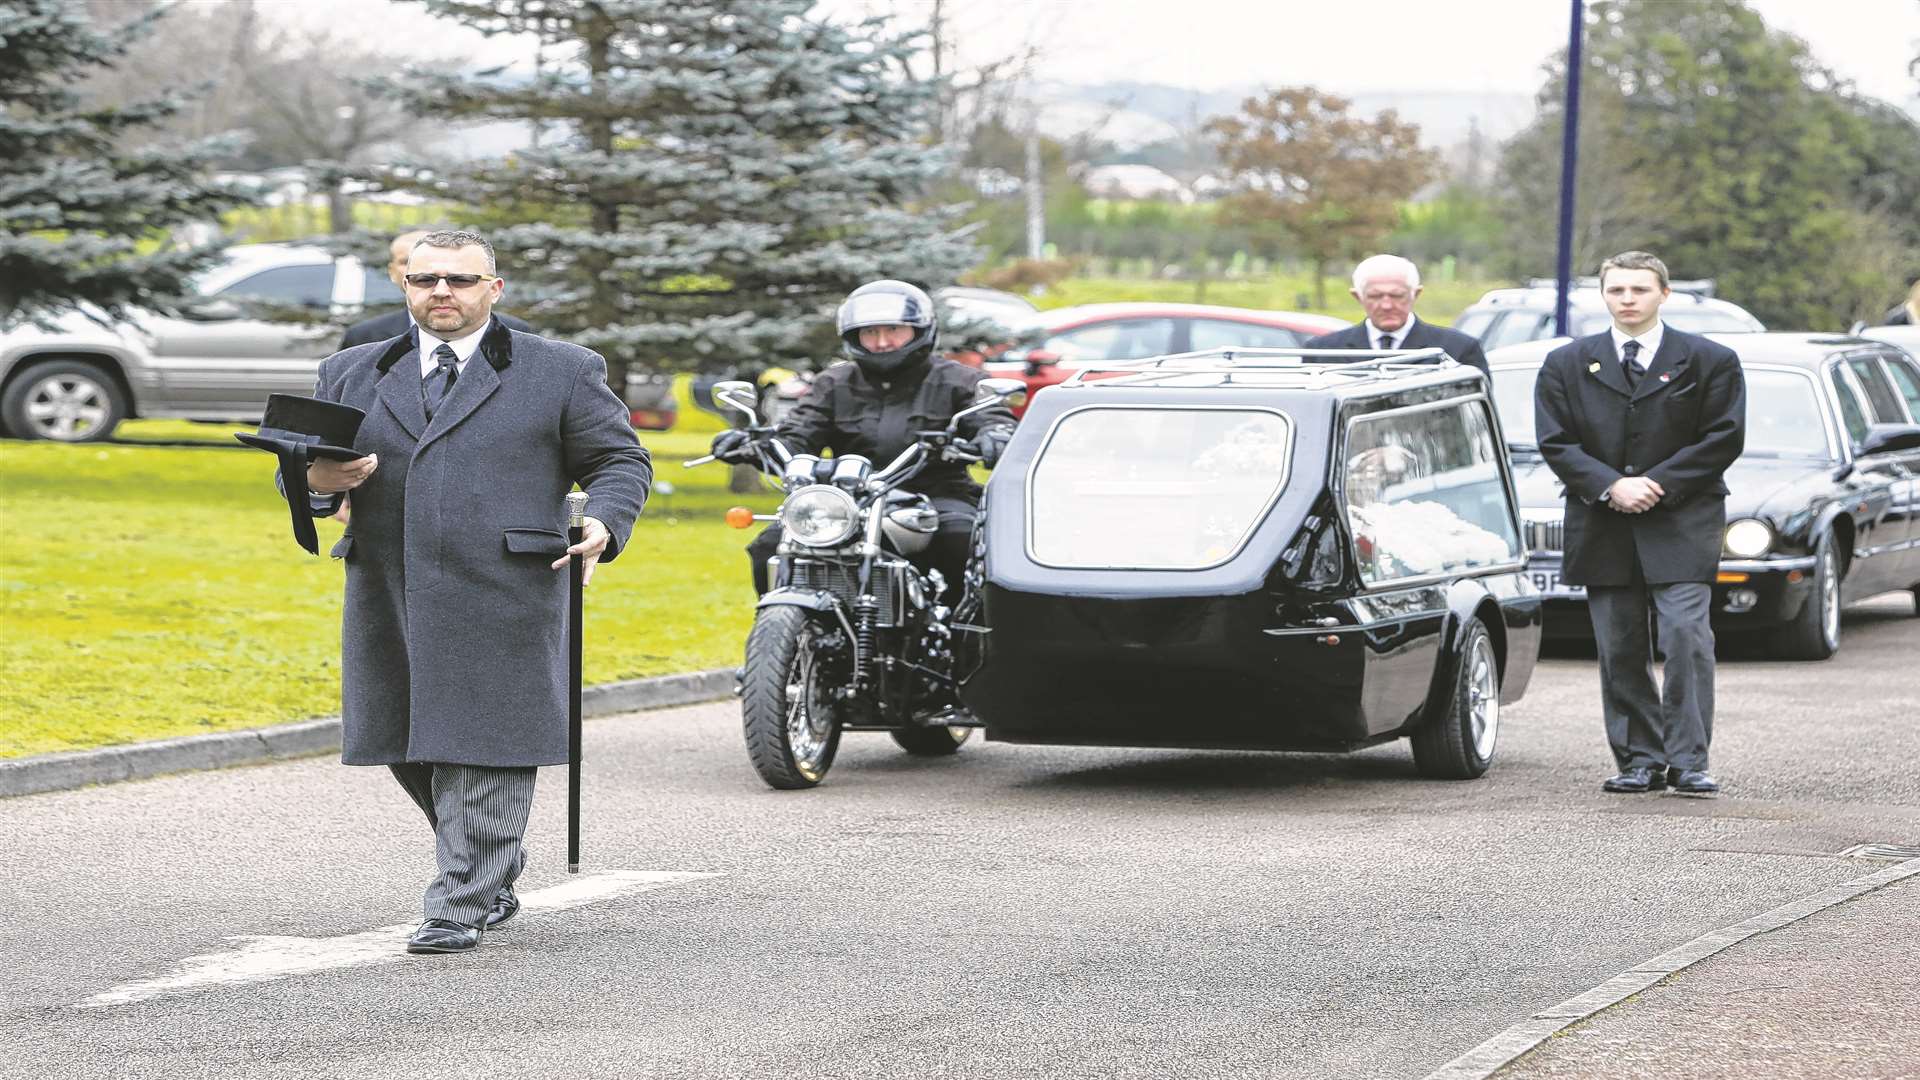 A convoy of bikers accompanied Doss on his last ride